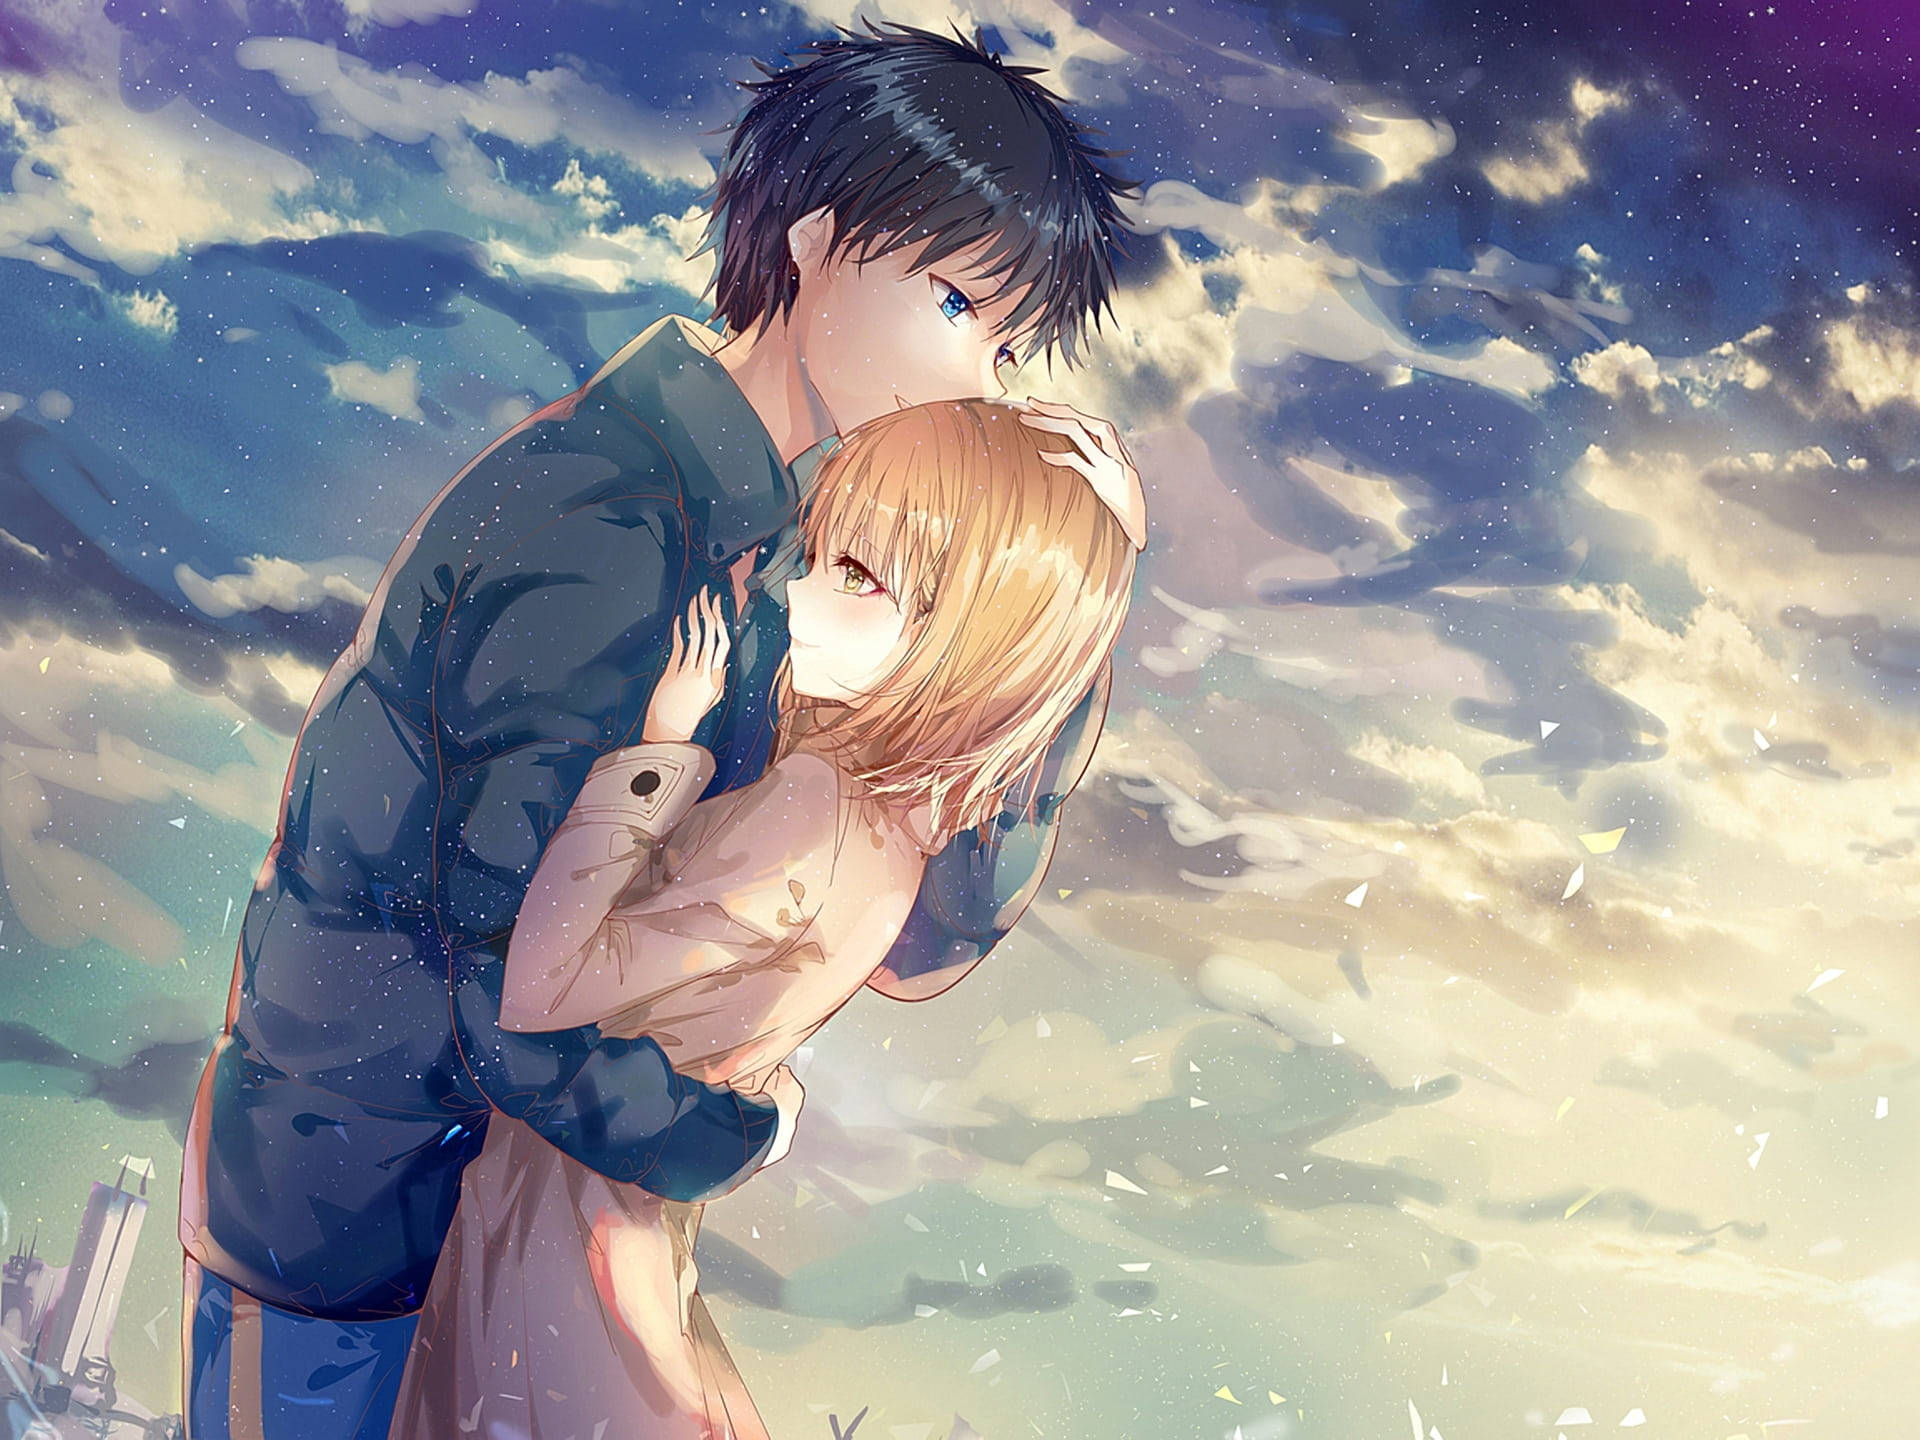 Cute Anime Couple Holding Each Other